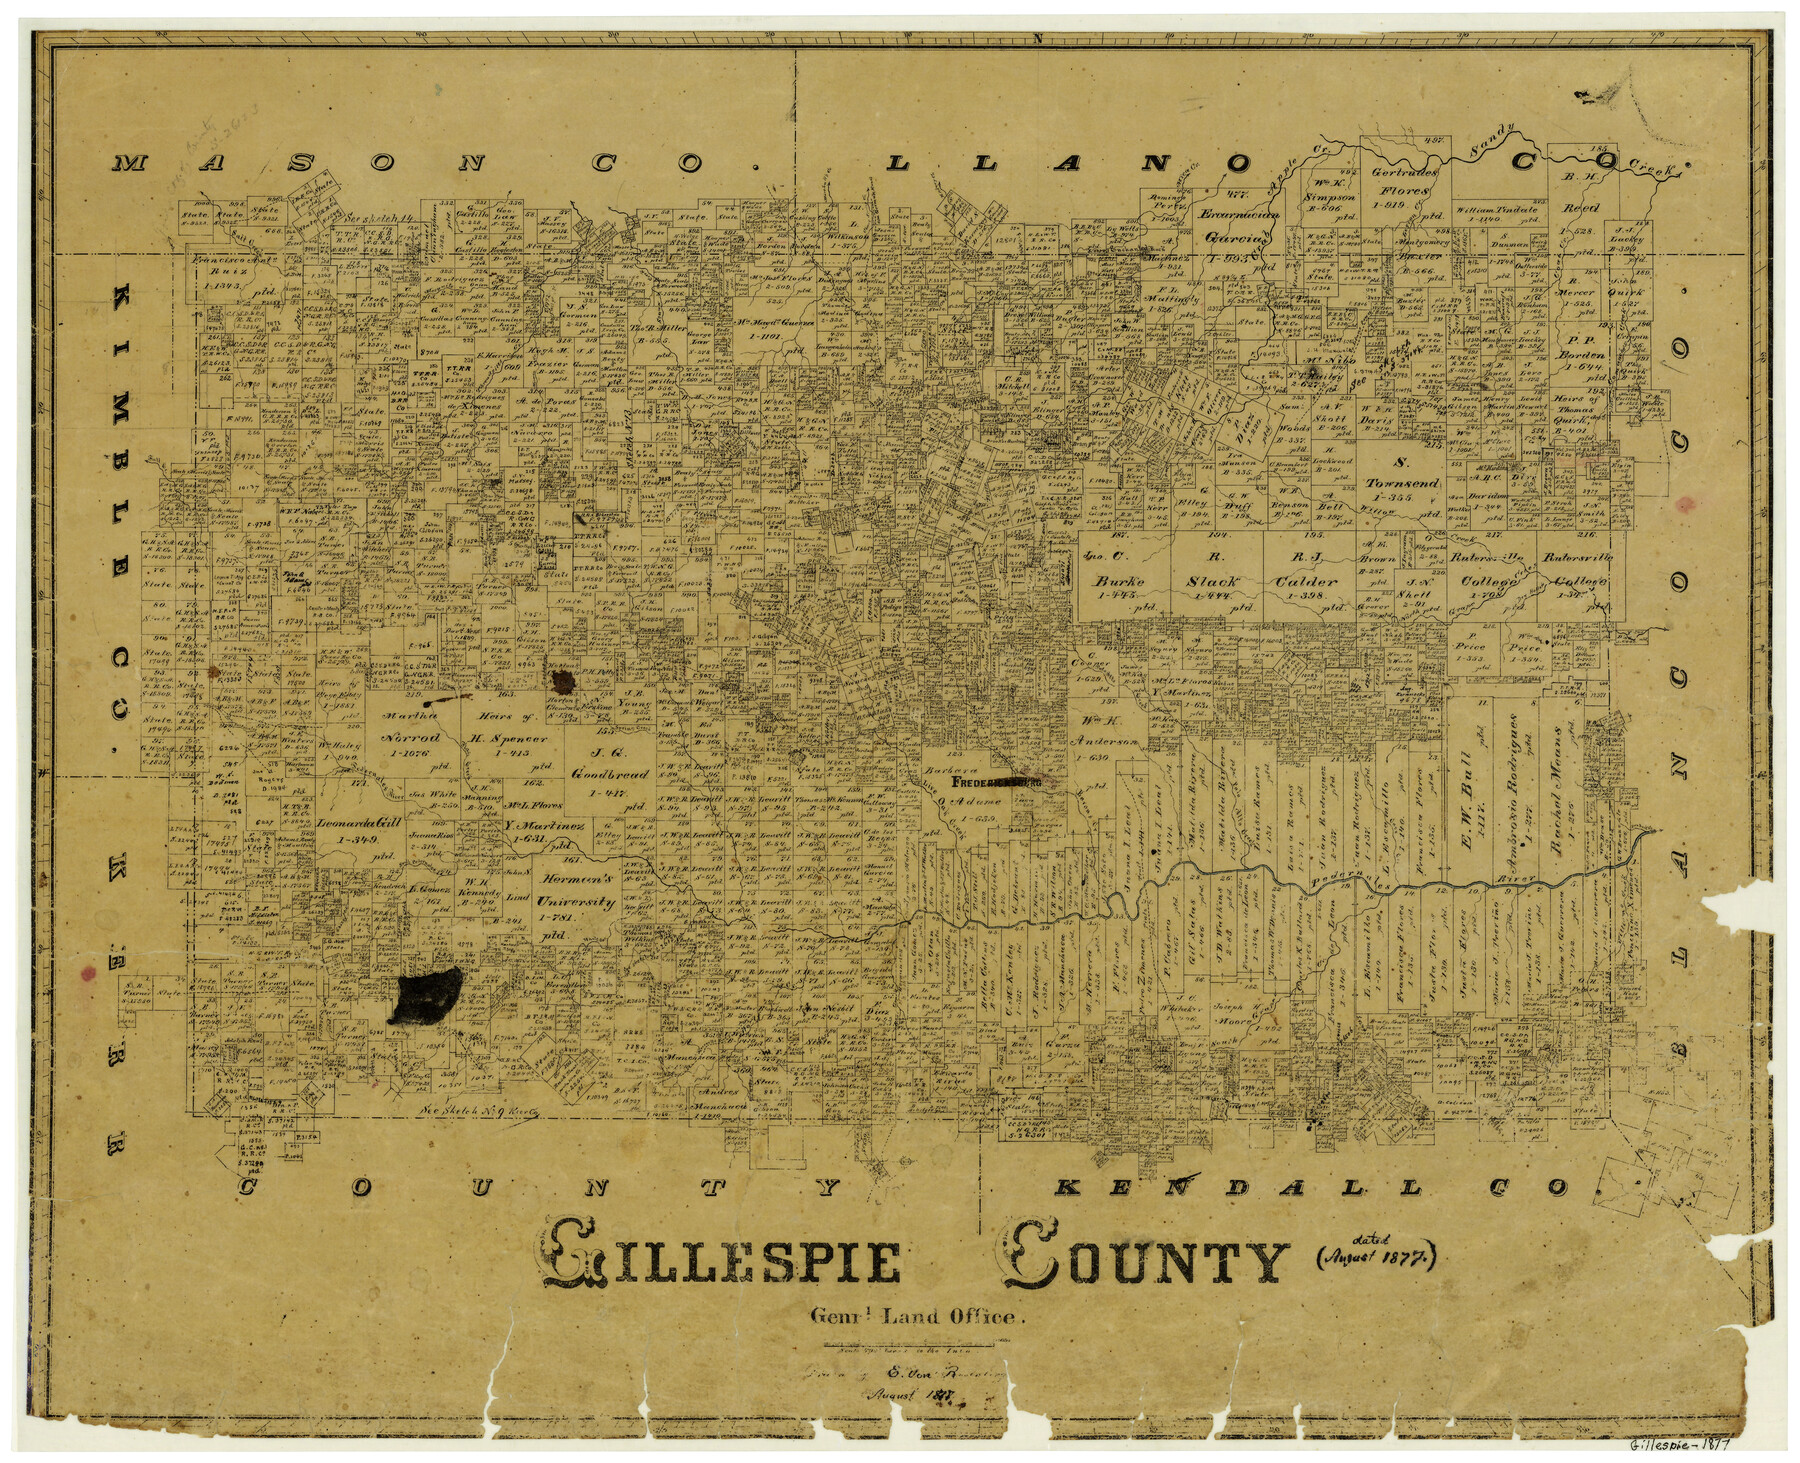 3583, Gillespie County